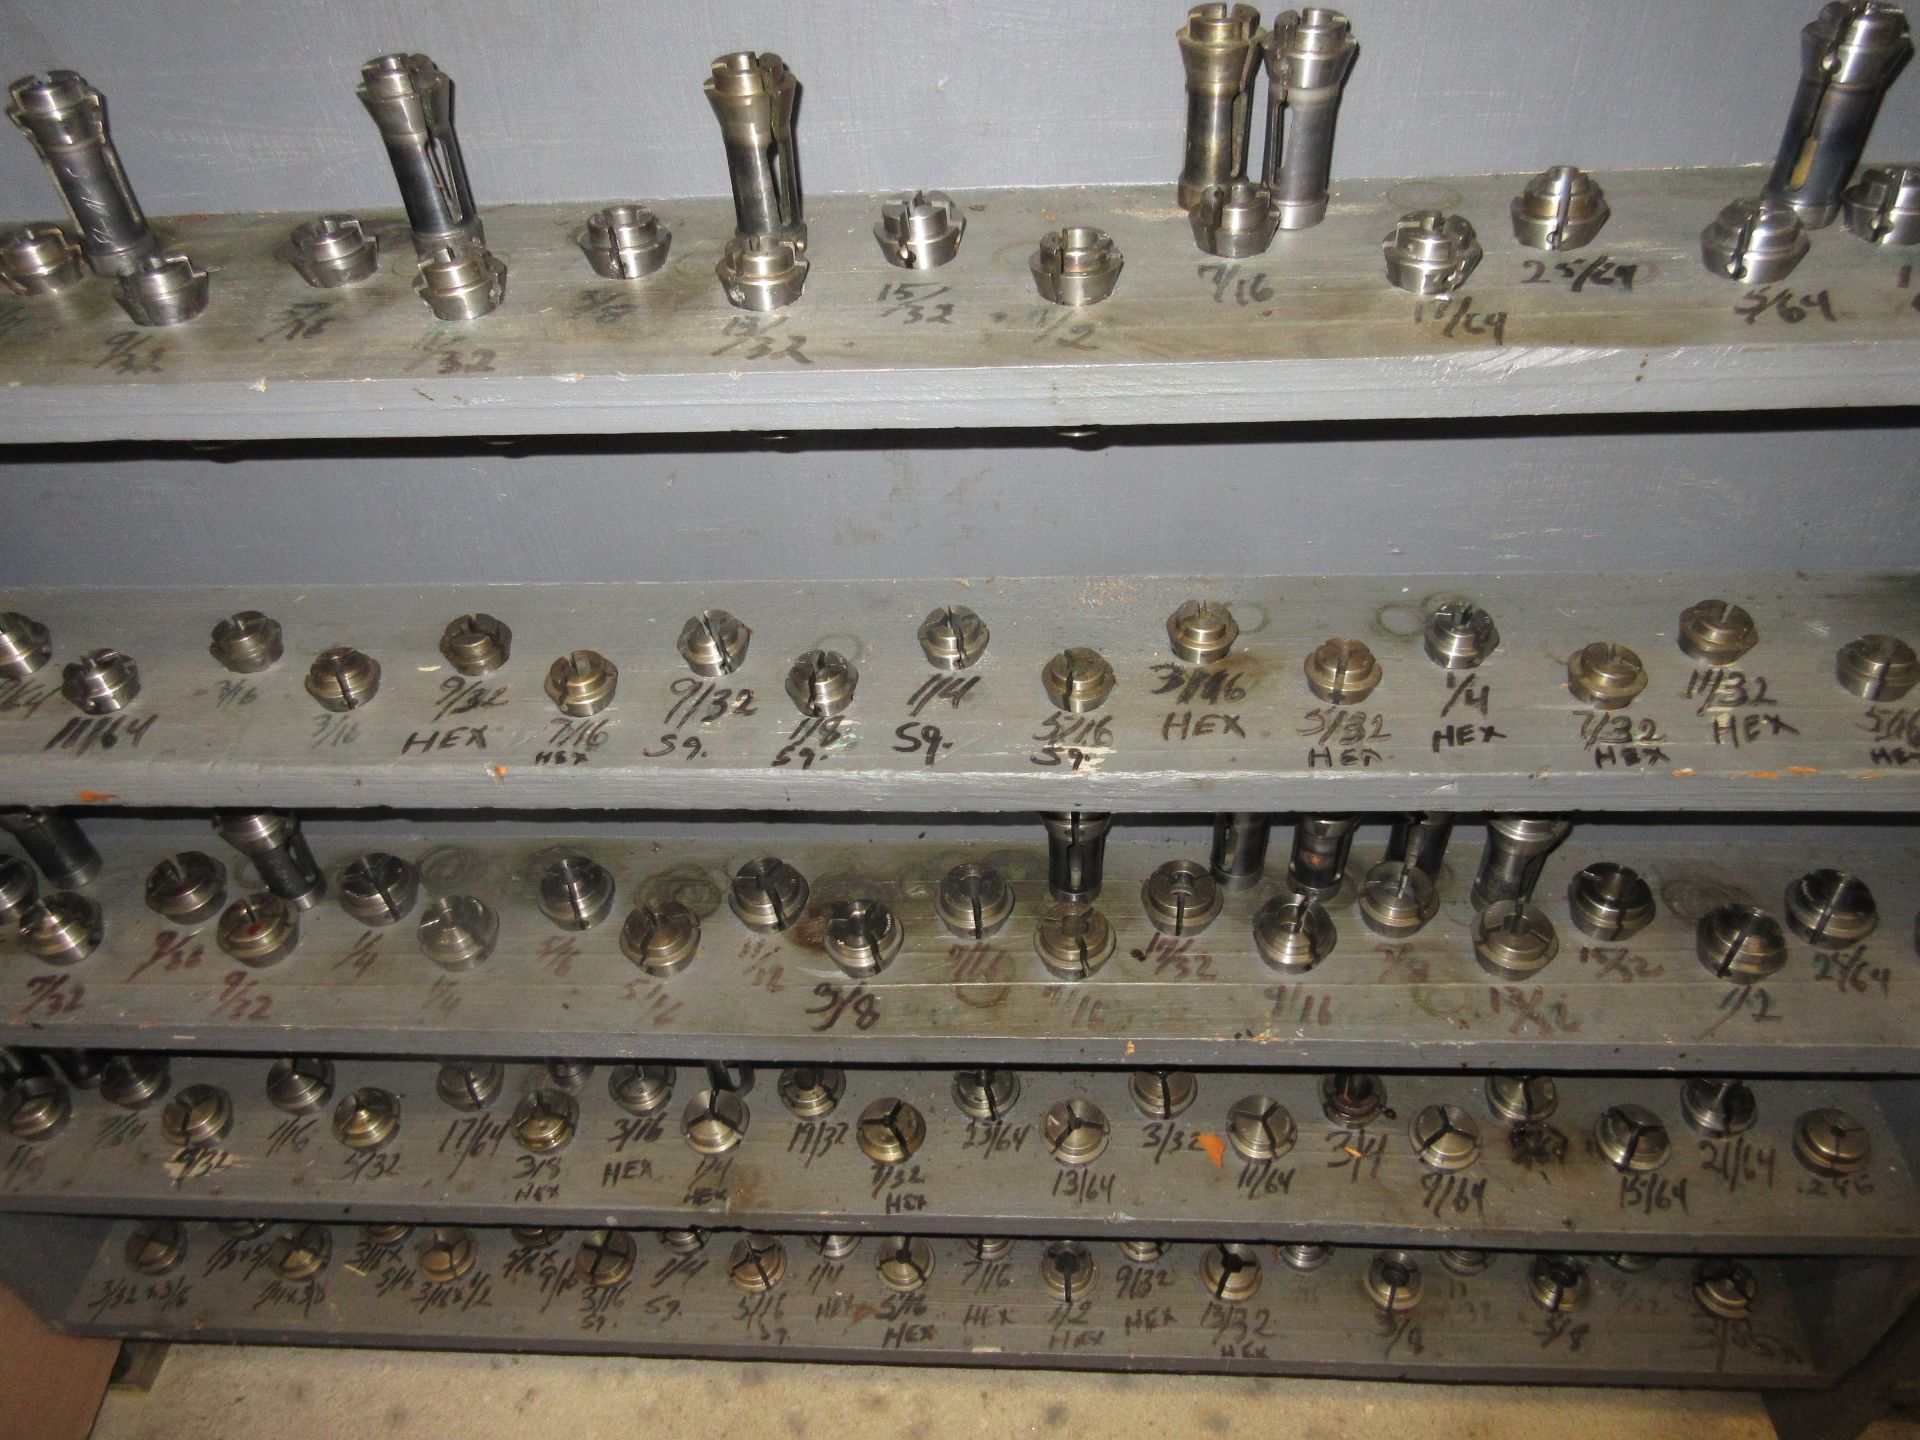 LOT Asst. Collets, Bushings, Drills, Chucks, Cutters, Tool Holders, Machine Parts, Knurling Tools in - Image 16 of 17